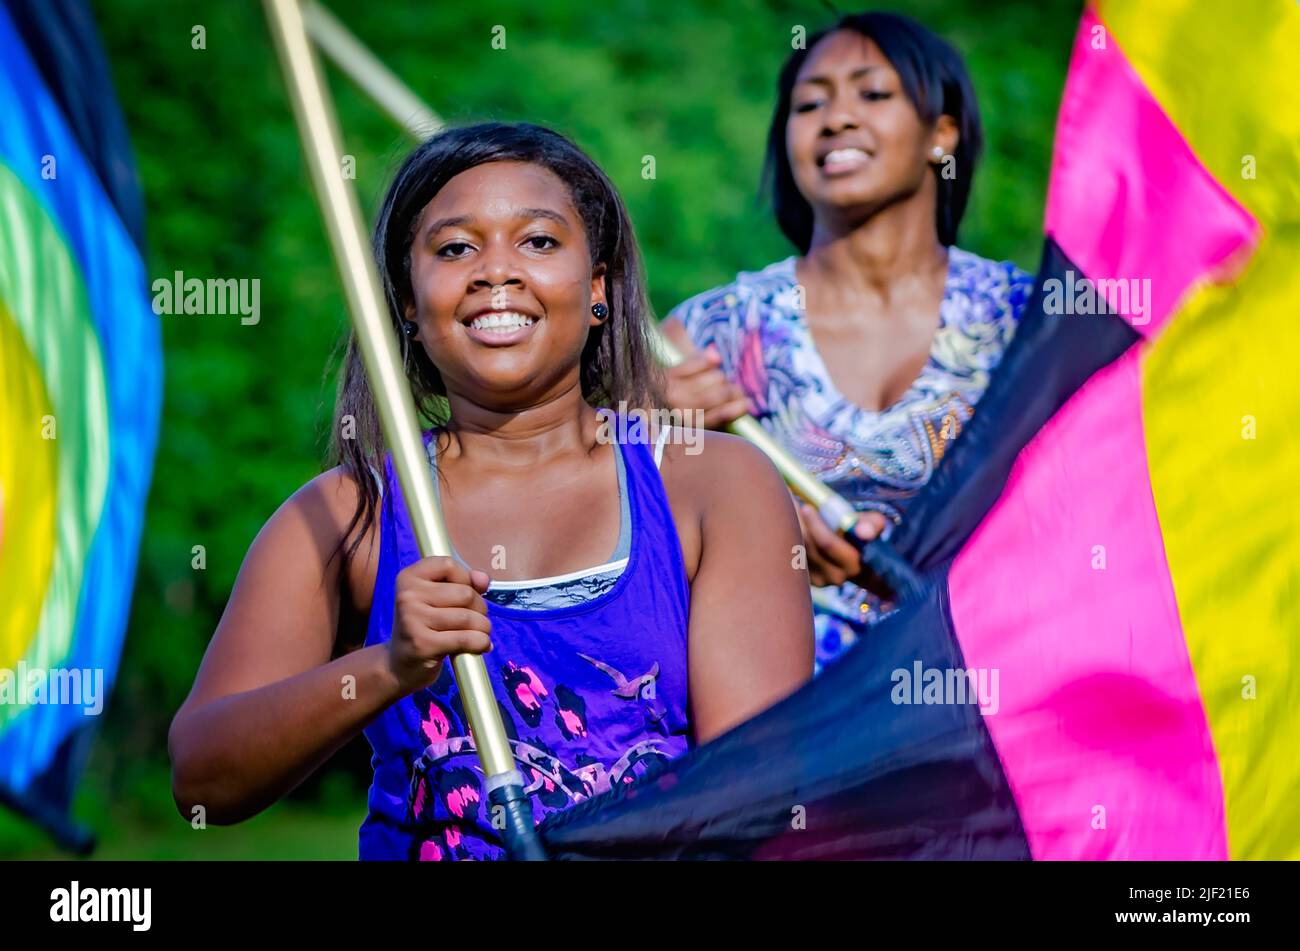 Members of the Columbus High School color guard twirl their flags during band practice, Aug. 16, 2012, in Columbus, Mississippi. Stock Photo